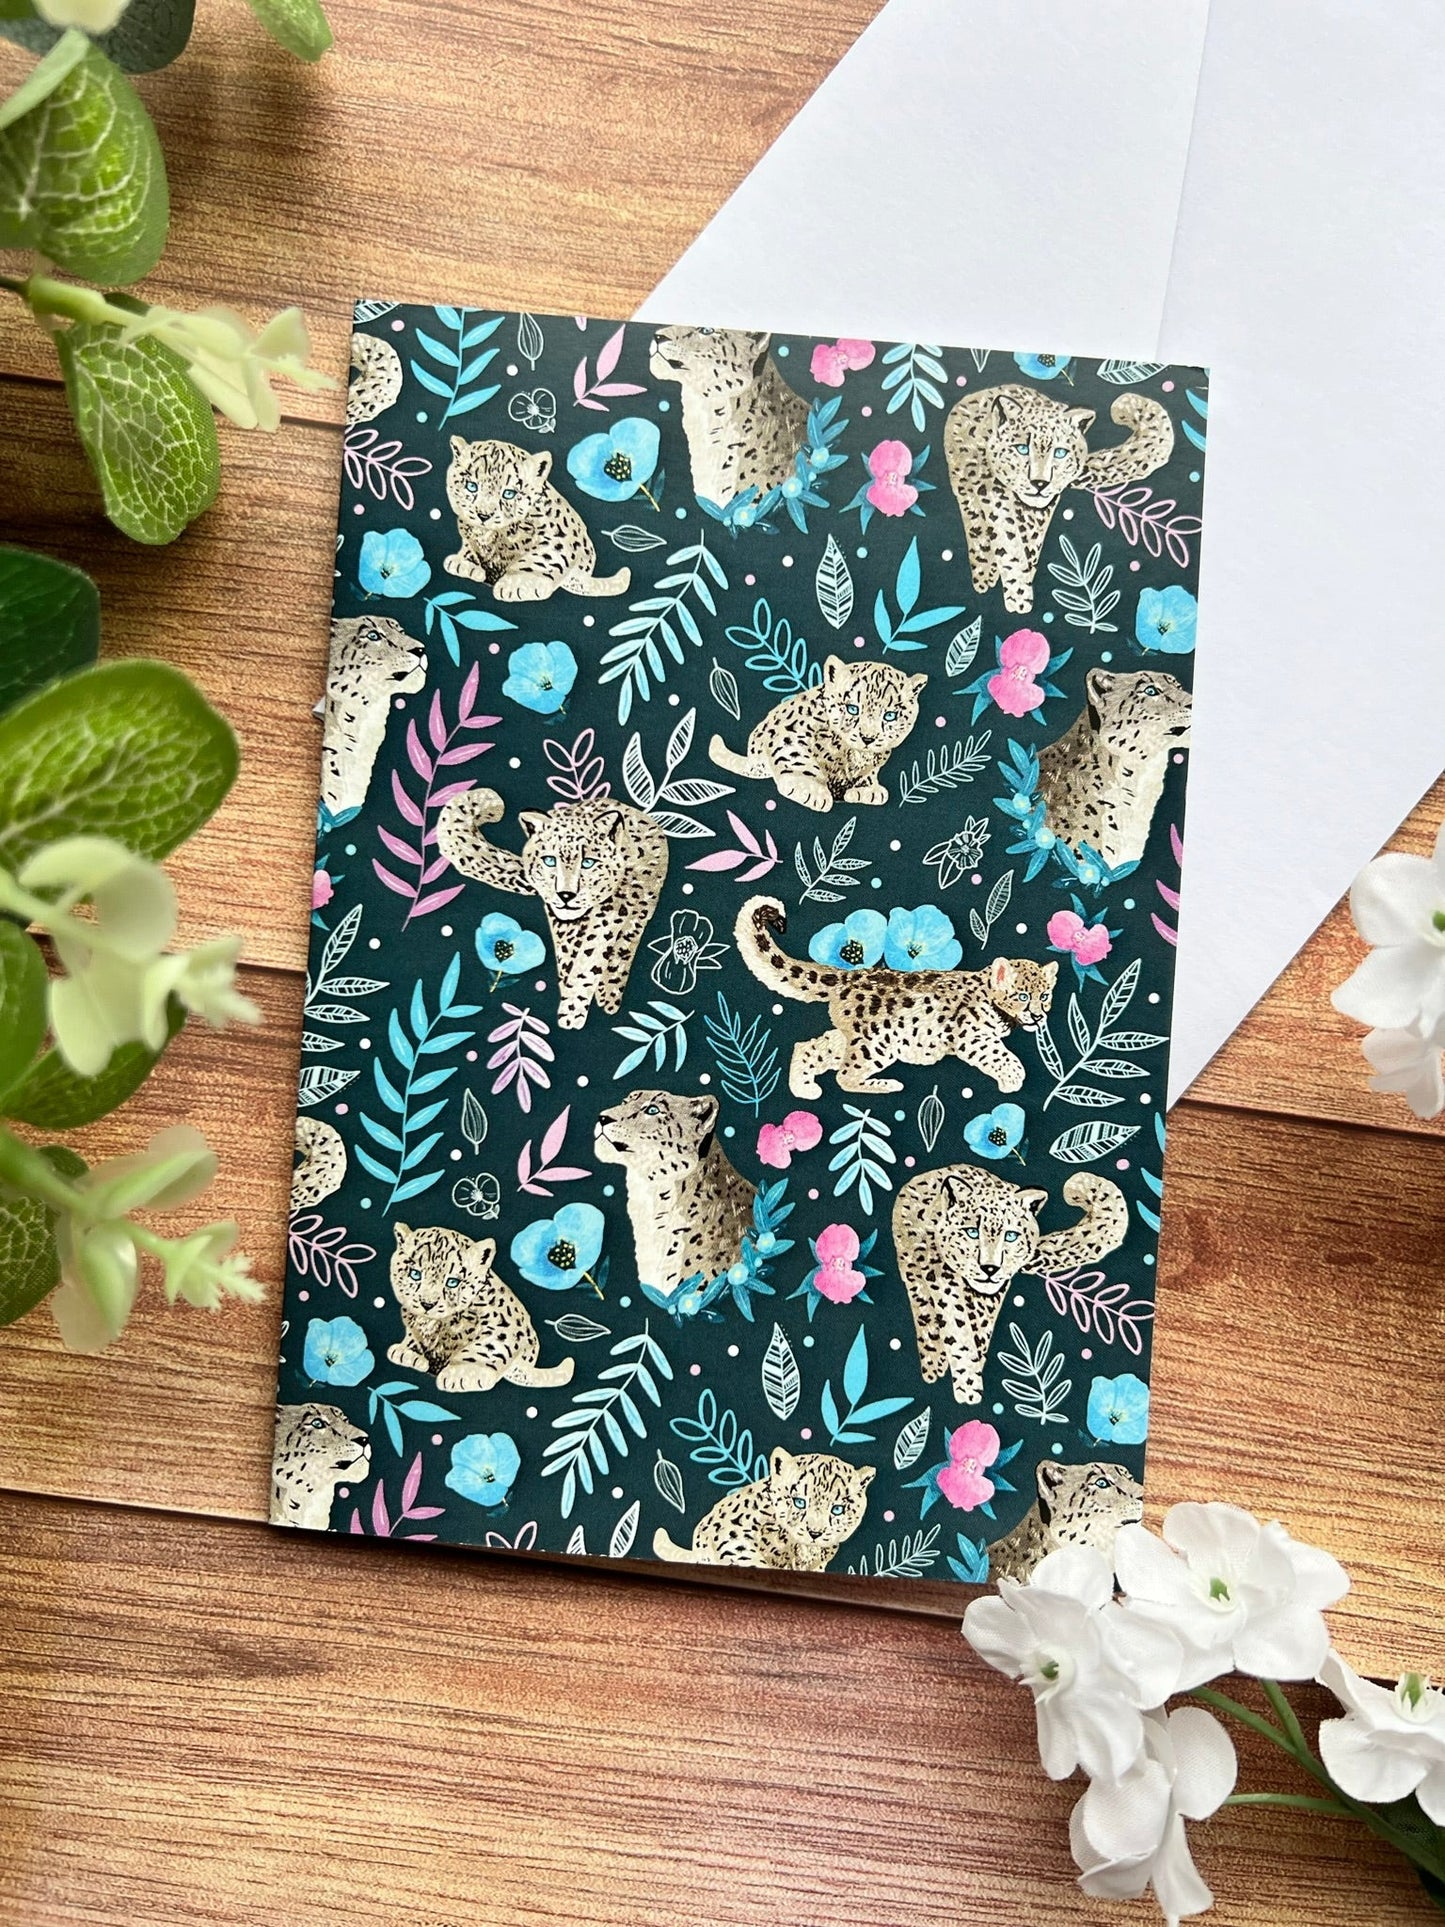 this snow leopard greeting card design is ideal for a wild animal lover, to match with the snow leopard gifts we also stock